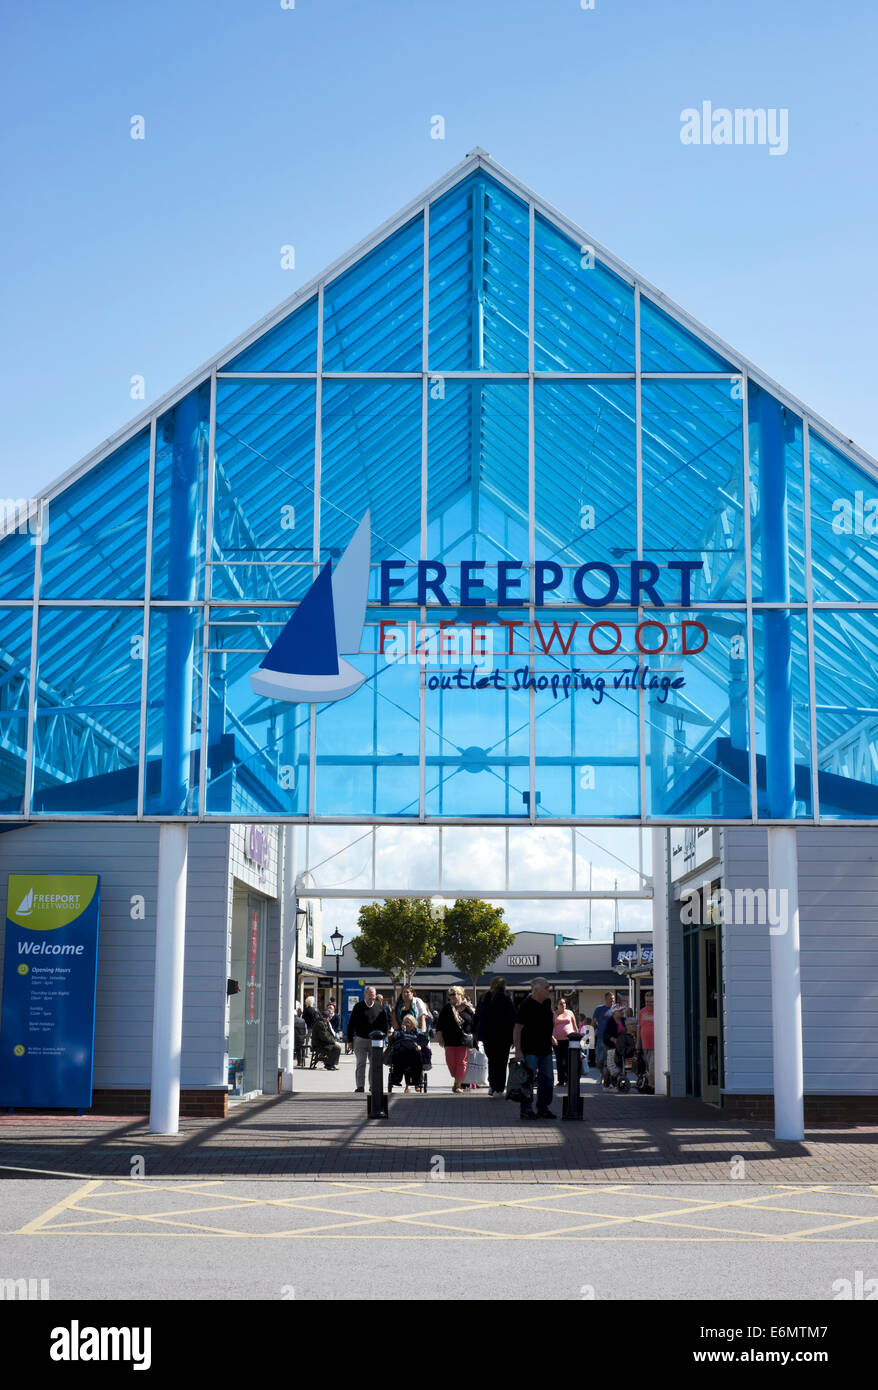 L'ingresso a fleetwood freeport outlet shopping center di Fleetwood, nel Lancashire, Inghilterra Foto Stock